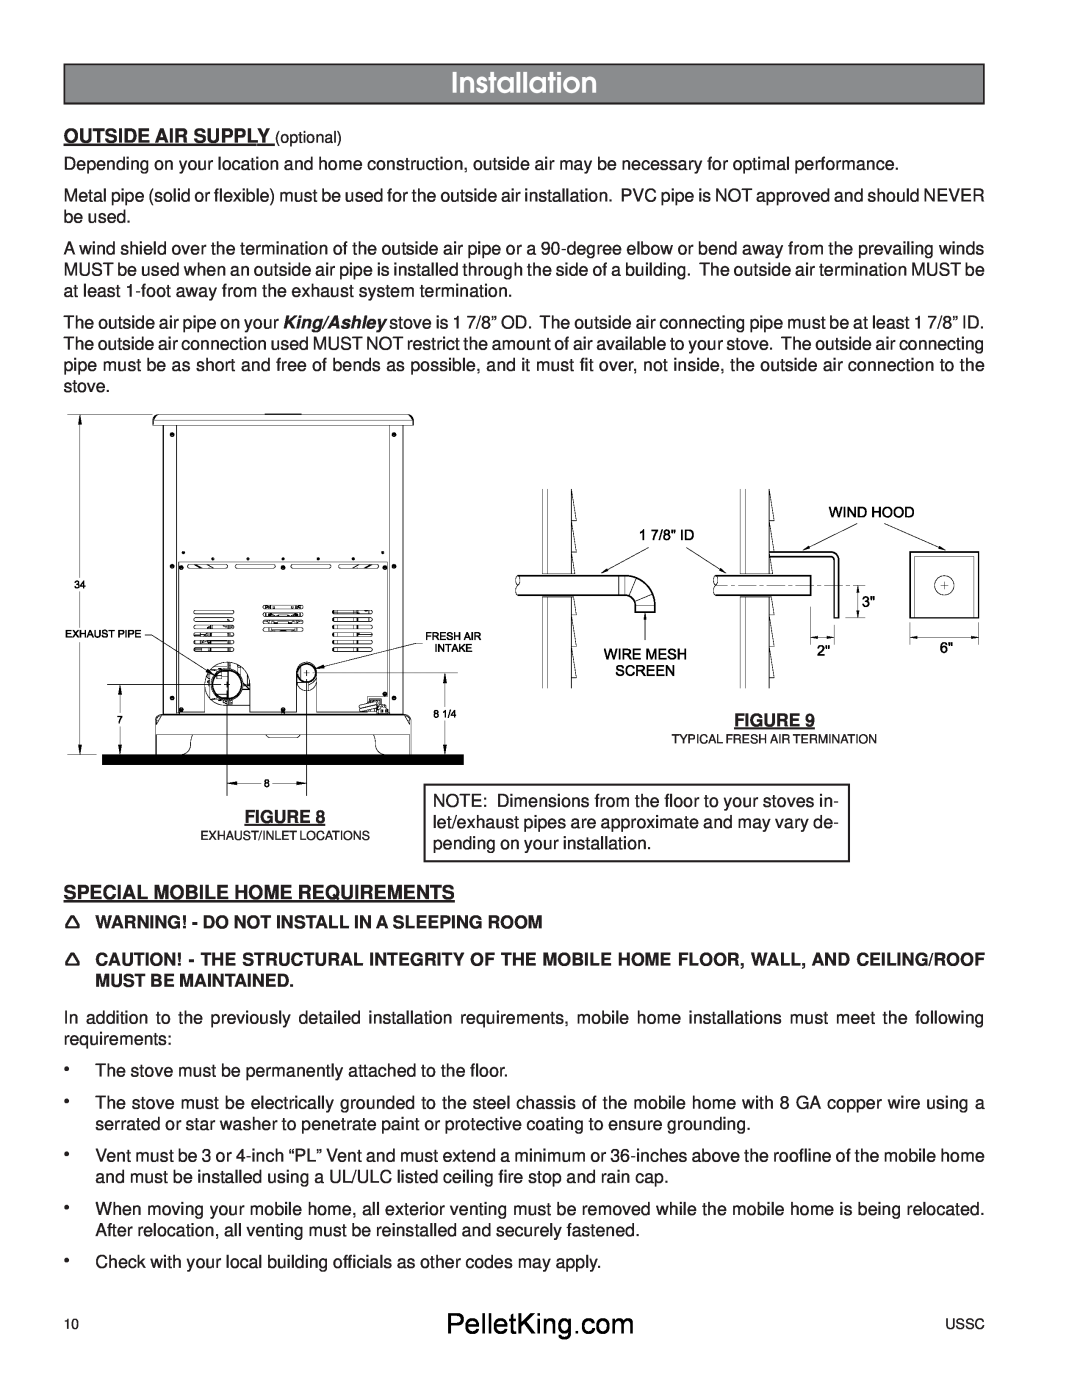 United States Stove 5500/5500XL owner manual Installation, OUTSIDE AIR SUPPLYoptional, Special Mobile Home Requirements 